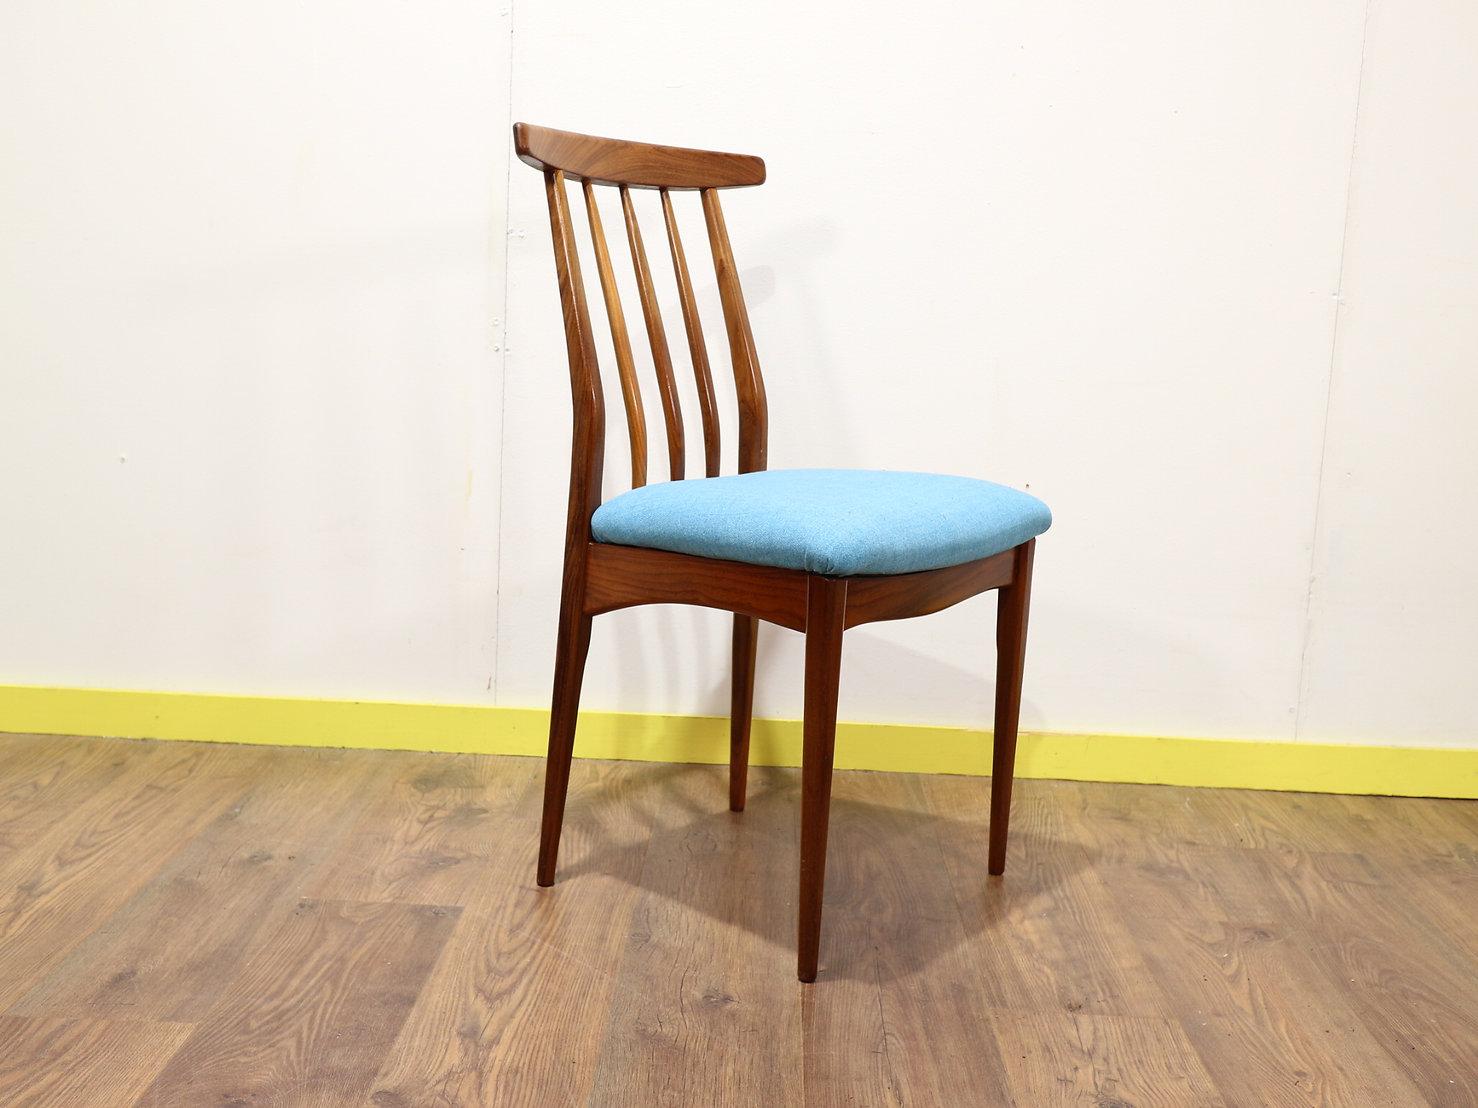 Teak Mid-Century Modern Dining Chairs x 6 by A. Younger